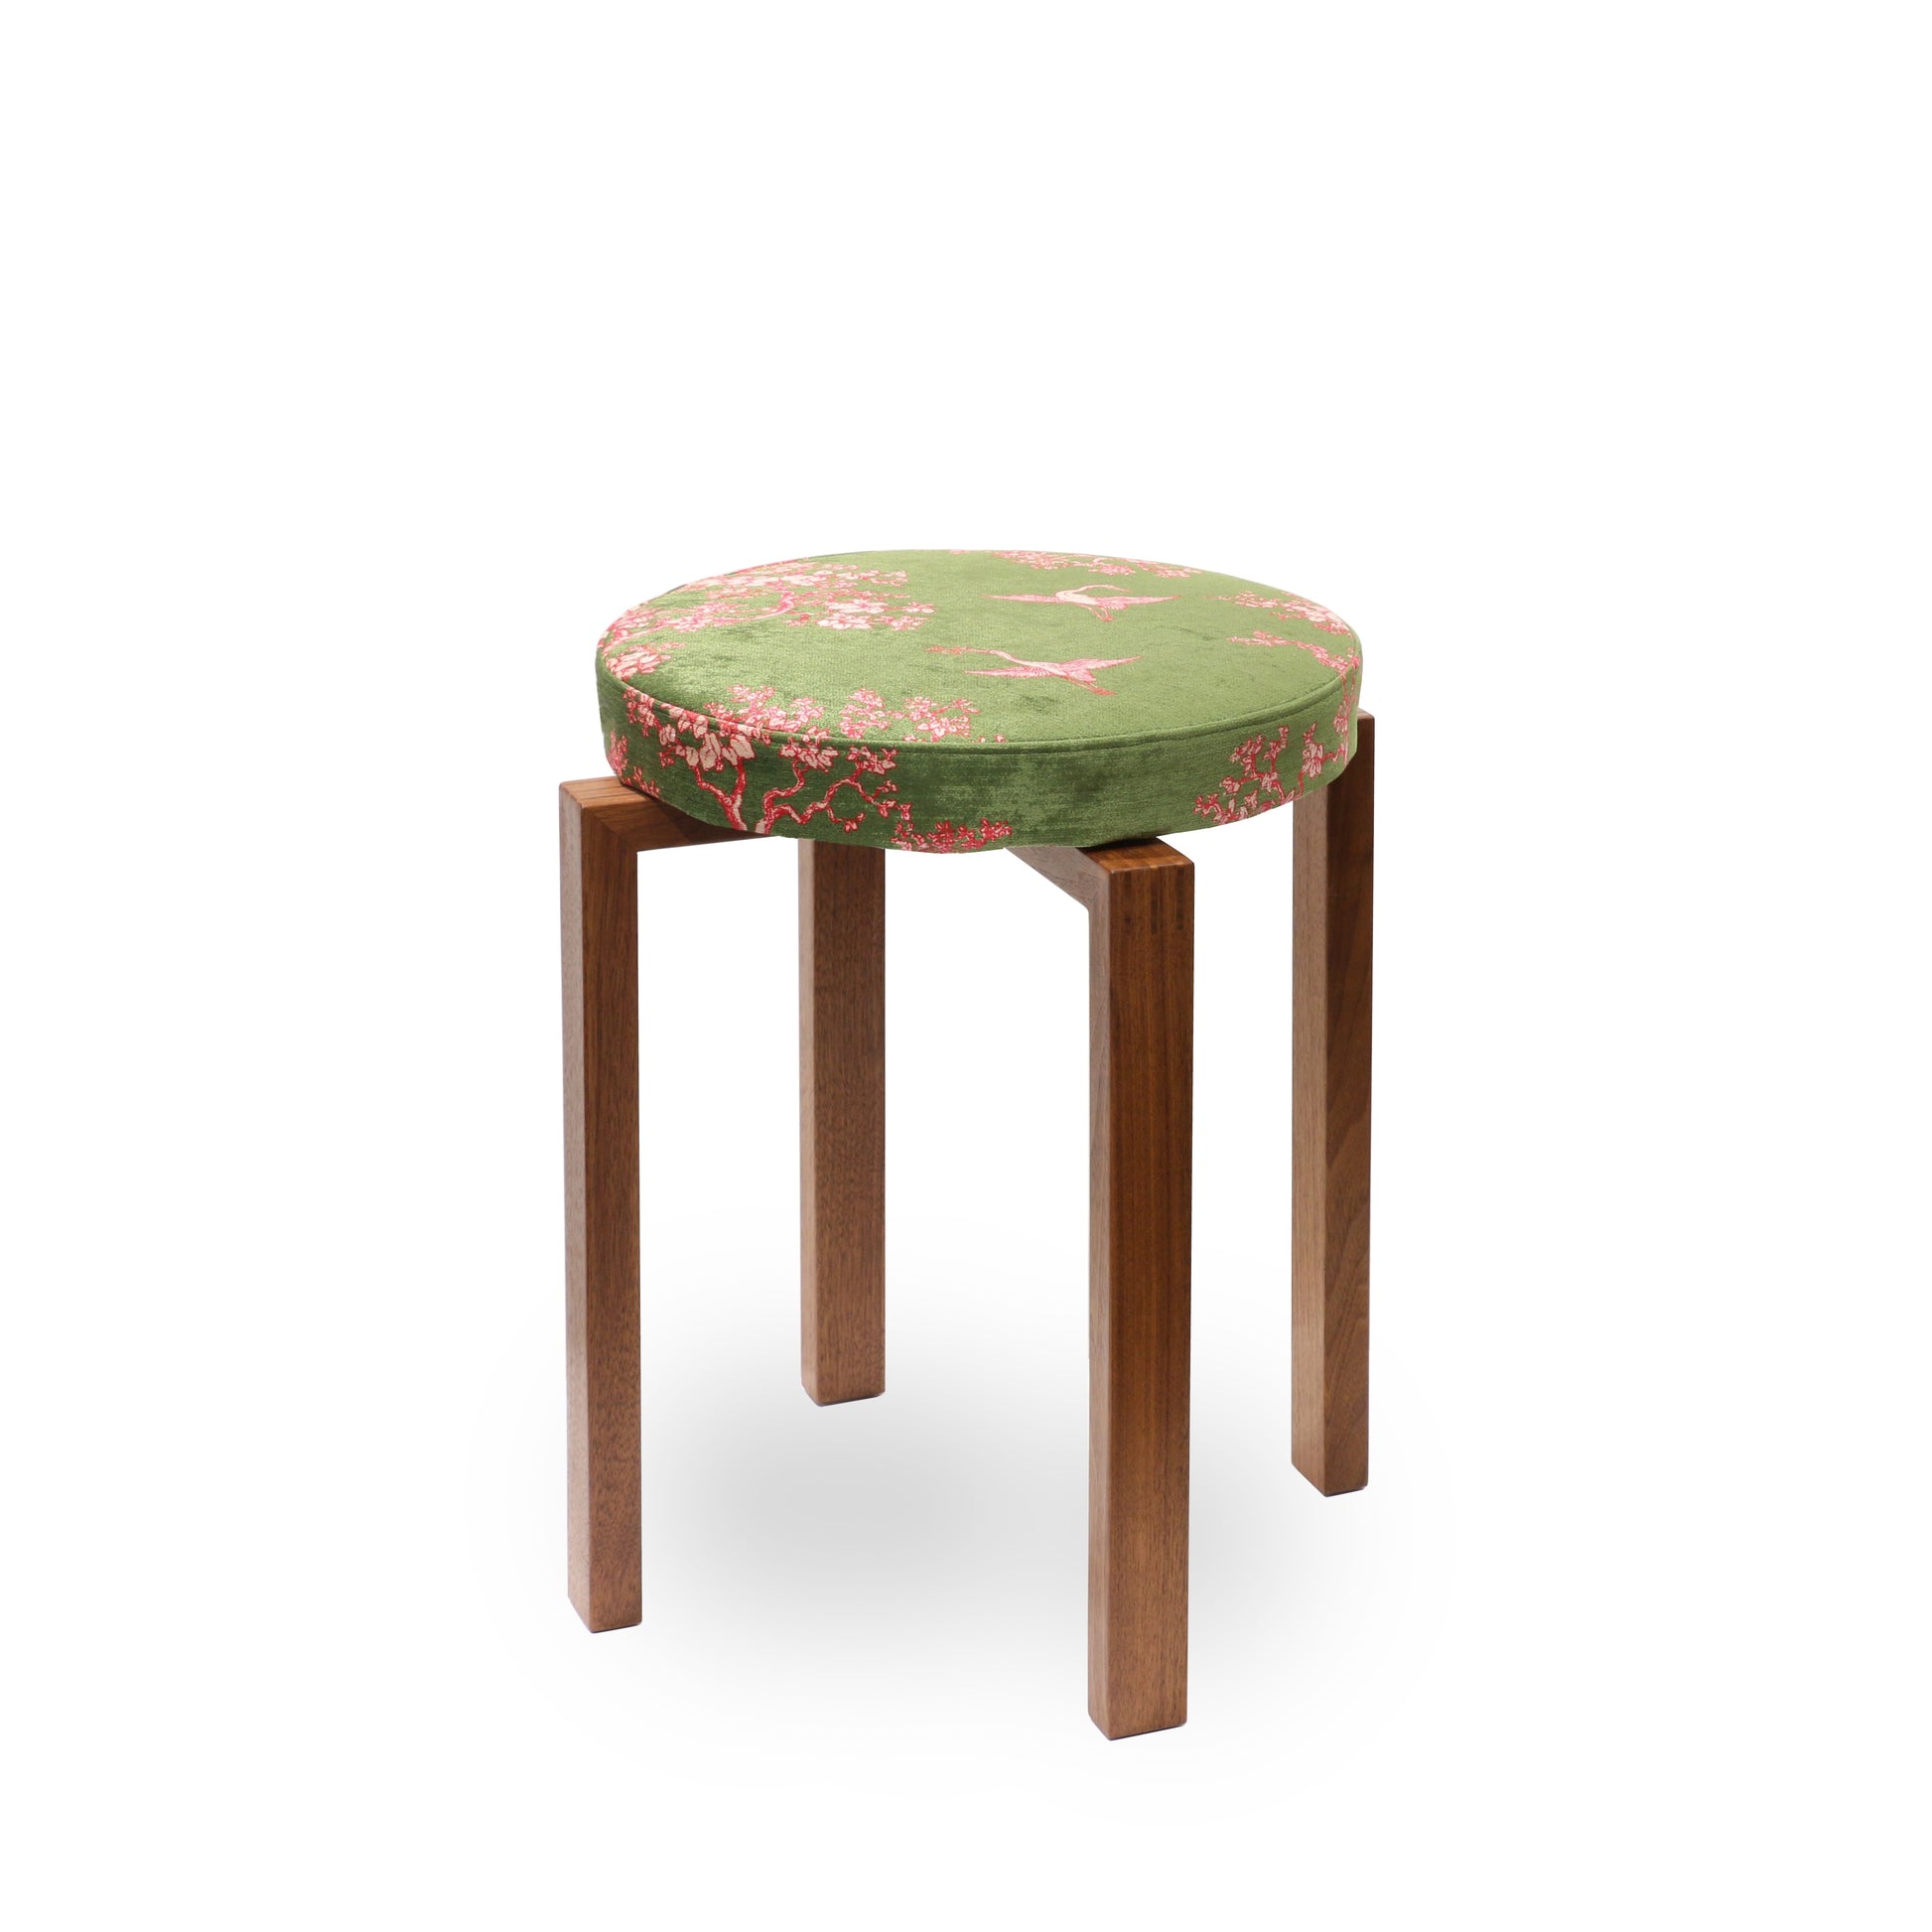 Kantti stool with removable cover by Deka